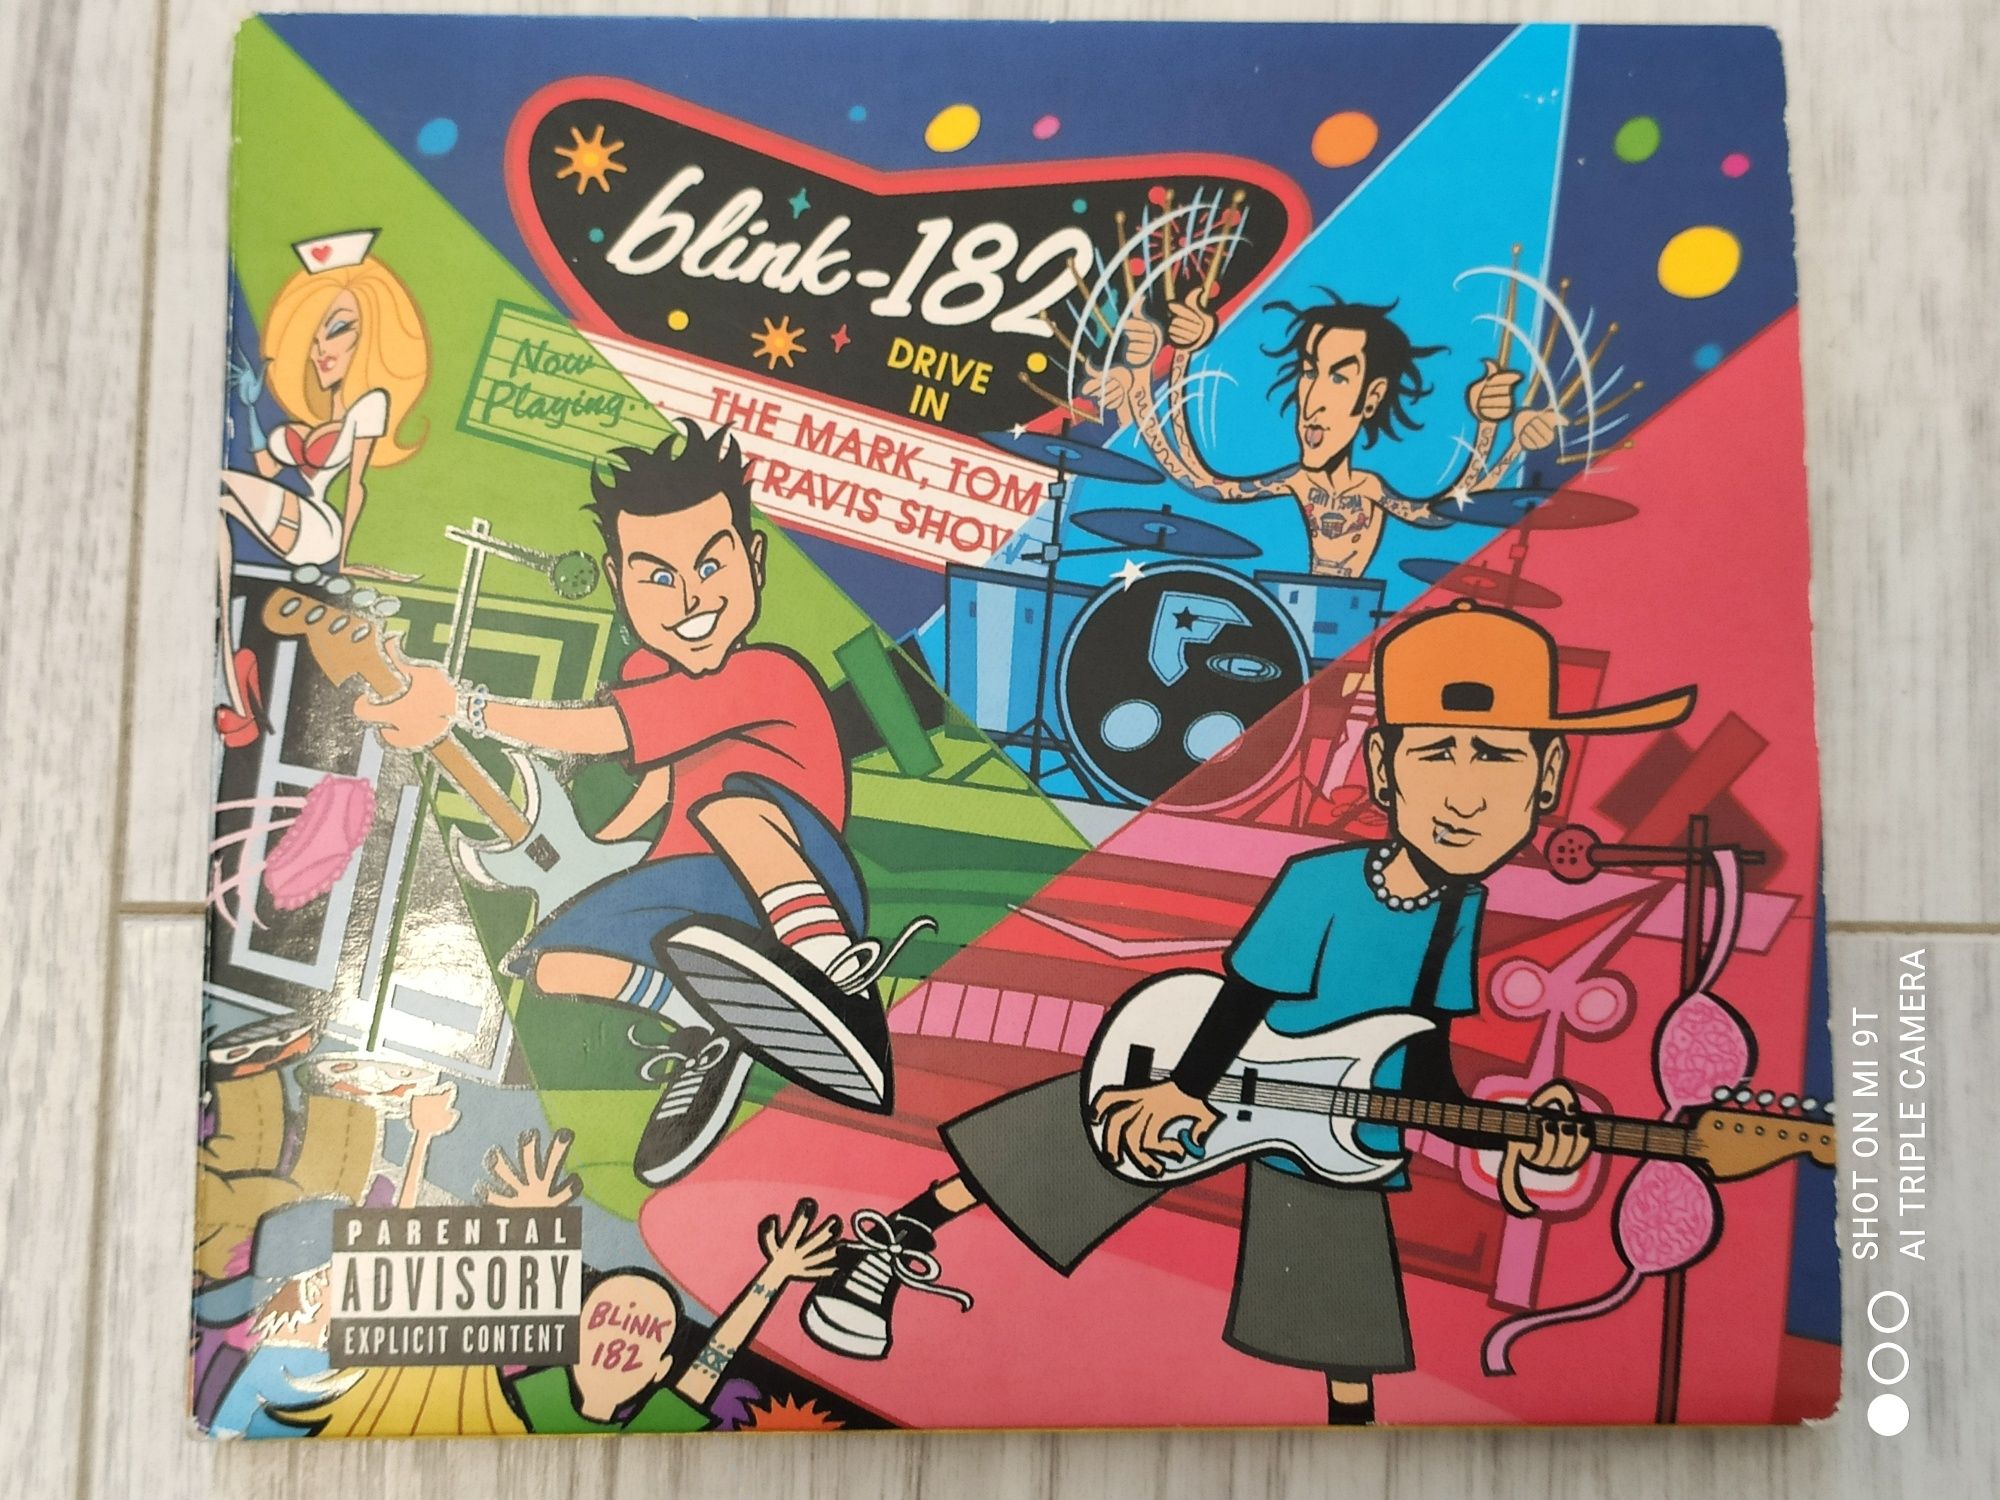 The Mark, Tom and Travis Show Blink-182 CD